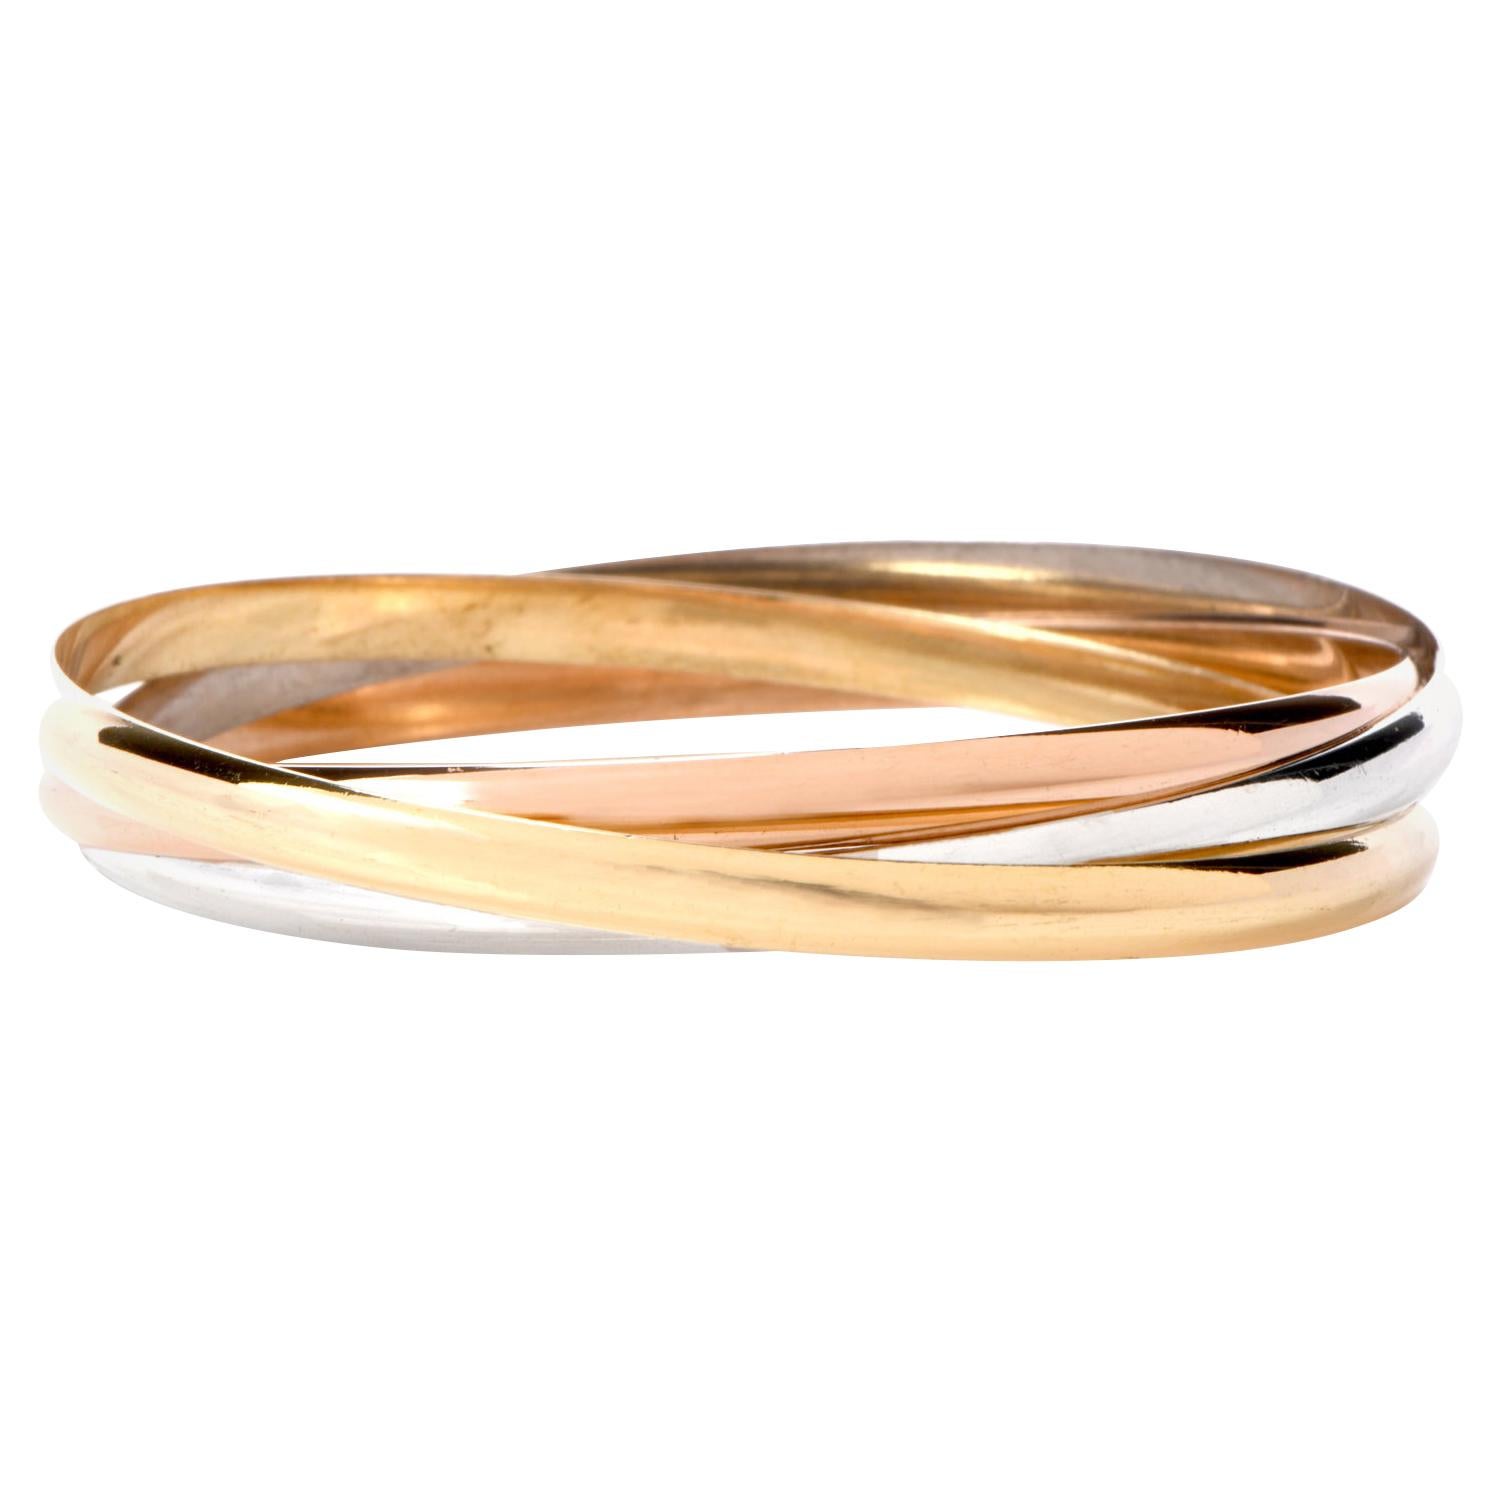 Mix and Match your entire jewelry wardrobe while
wearing and enjoying this beautiful Catier multi-bangle bracelet  made  in 18K rose, yellow, and white gold.

Each interlocking bracelet has been highly polished to accent

the color.

Weighing appx.